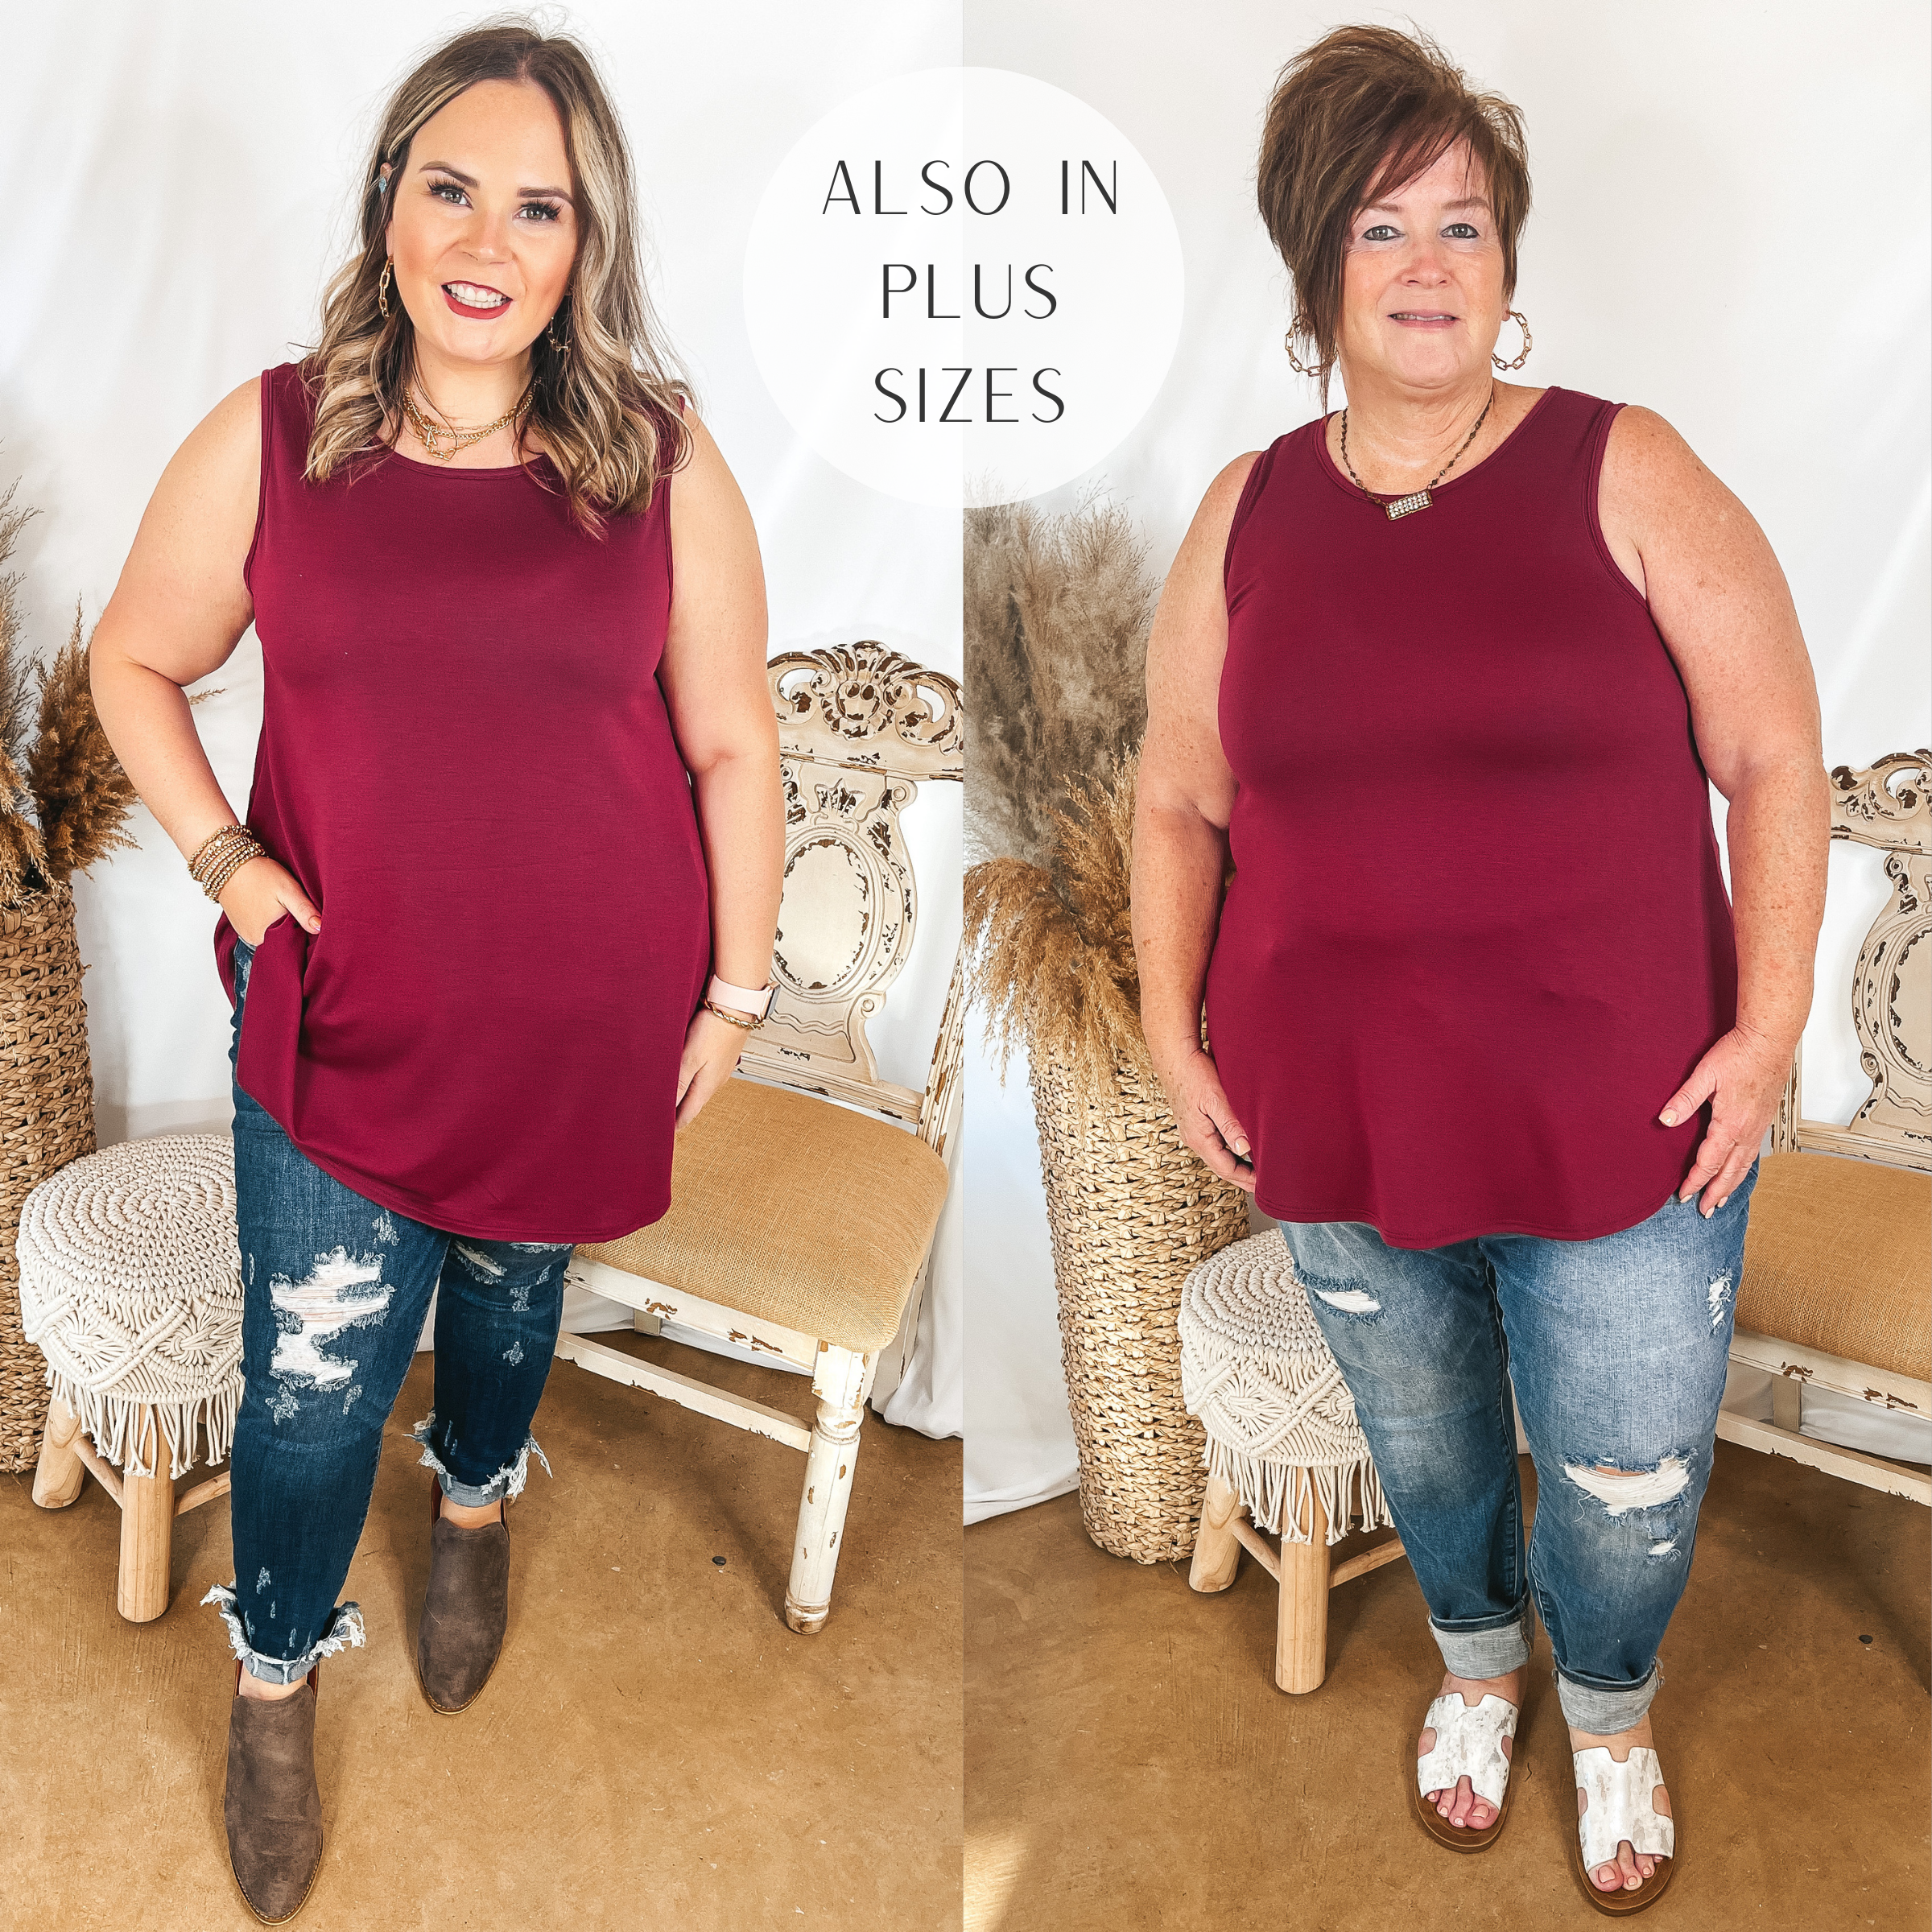 Models are wearing a maroon a line tank top. Size large model has it paired with dark wash skinny jeans, brown booties, and gold jewelry. Plus size model has it paired with boyfriend jeans, white sandals, and pink panache jewelry. 